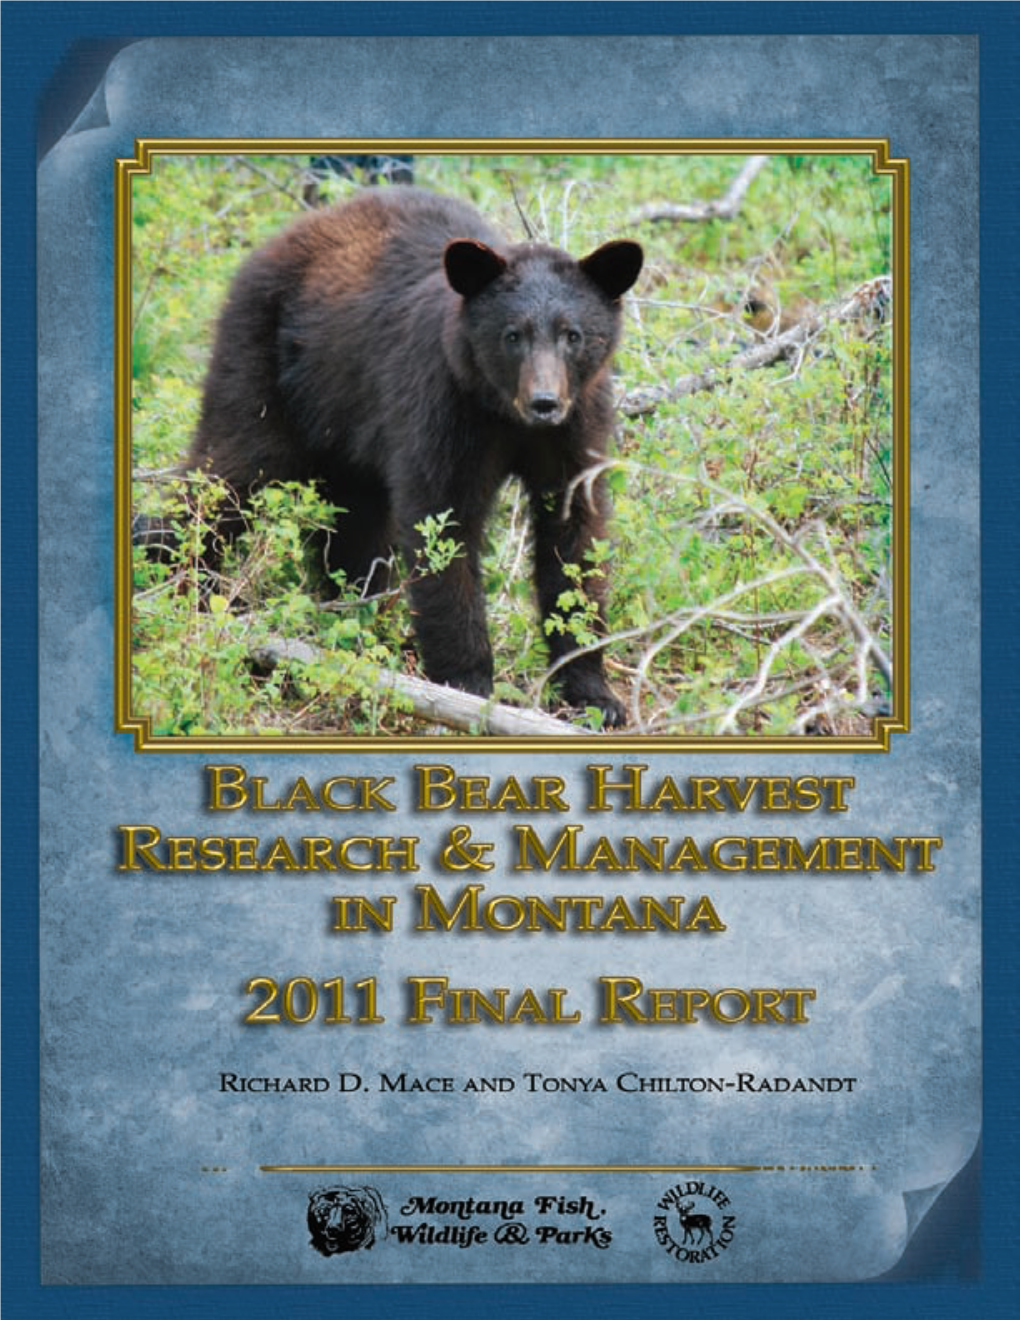 Black Bear Harvest Research and Management in Montana: Final Report